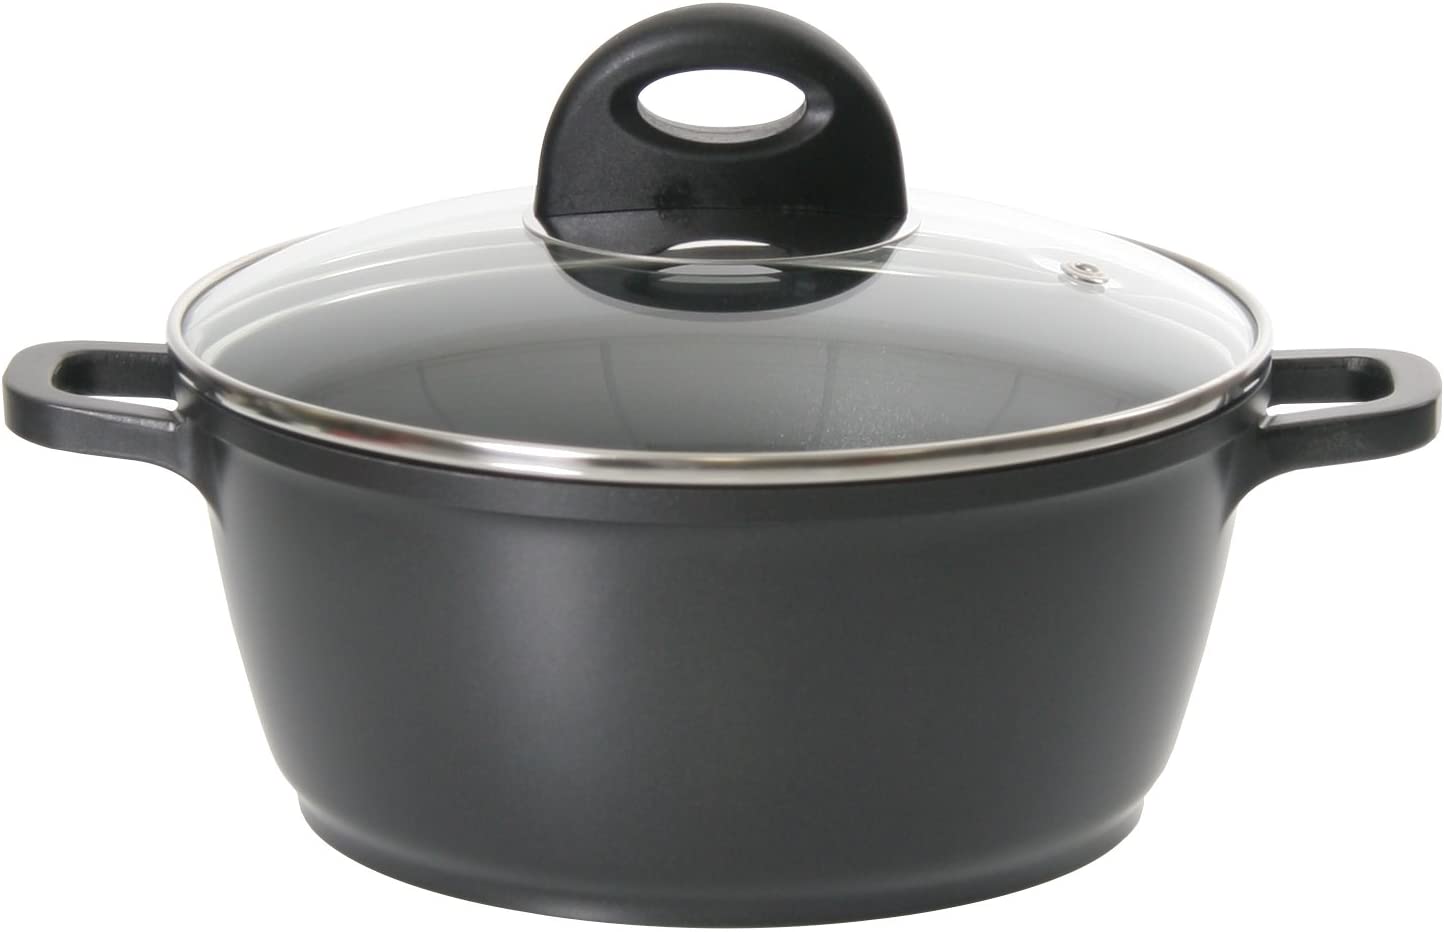 Ingenio von Tefal Top Hit Pandura 221453 Pot with Glass Lid 20 cm 2.1 L Cookware for Electric/Gas/Glass-Ceramic Cookers Cast-Aluminium